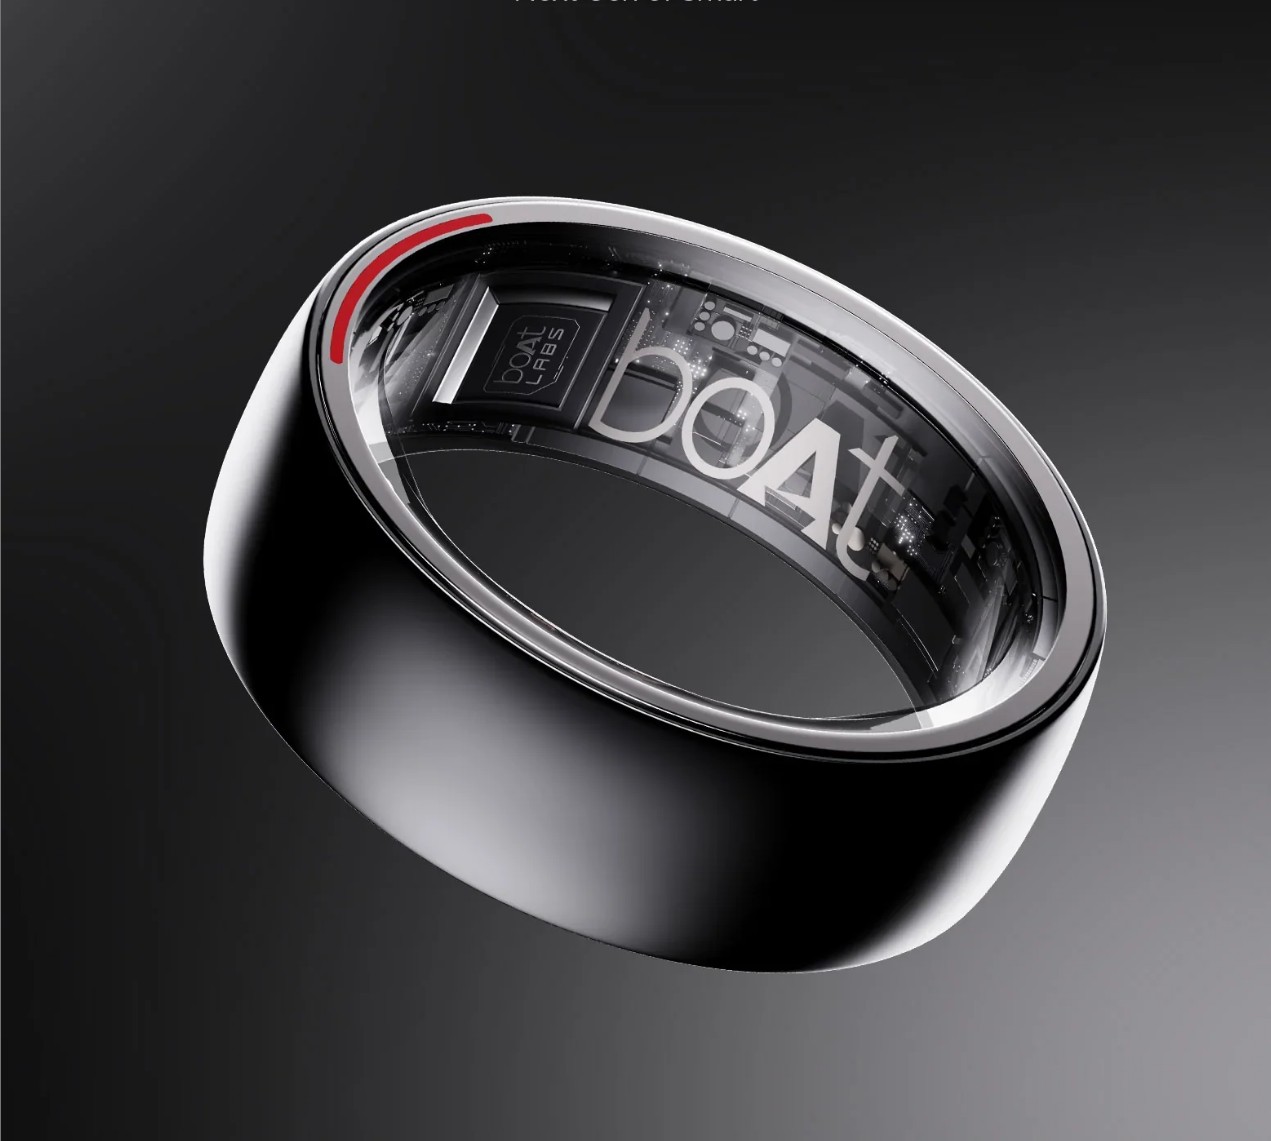 BoAt Smart Ring revealed with skin temperature sensor and touch controls